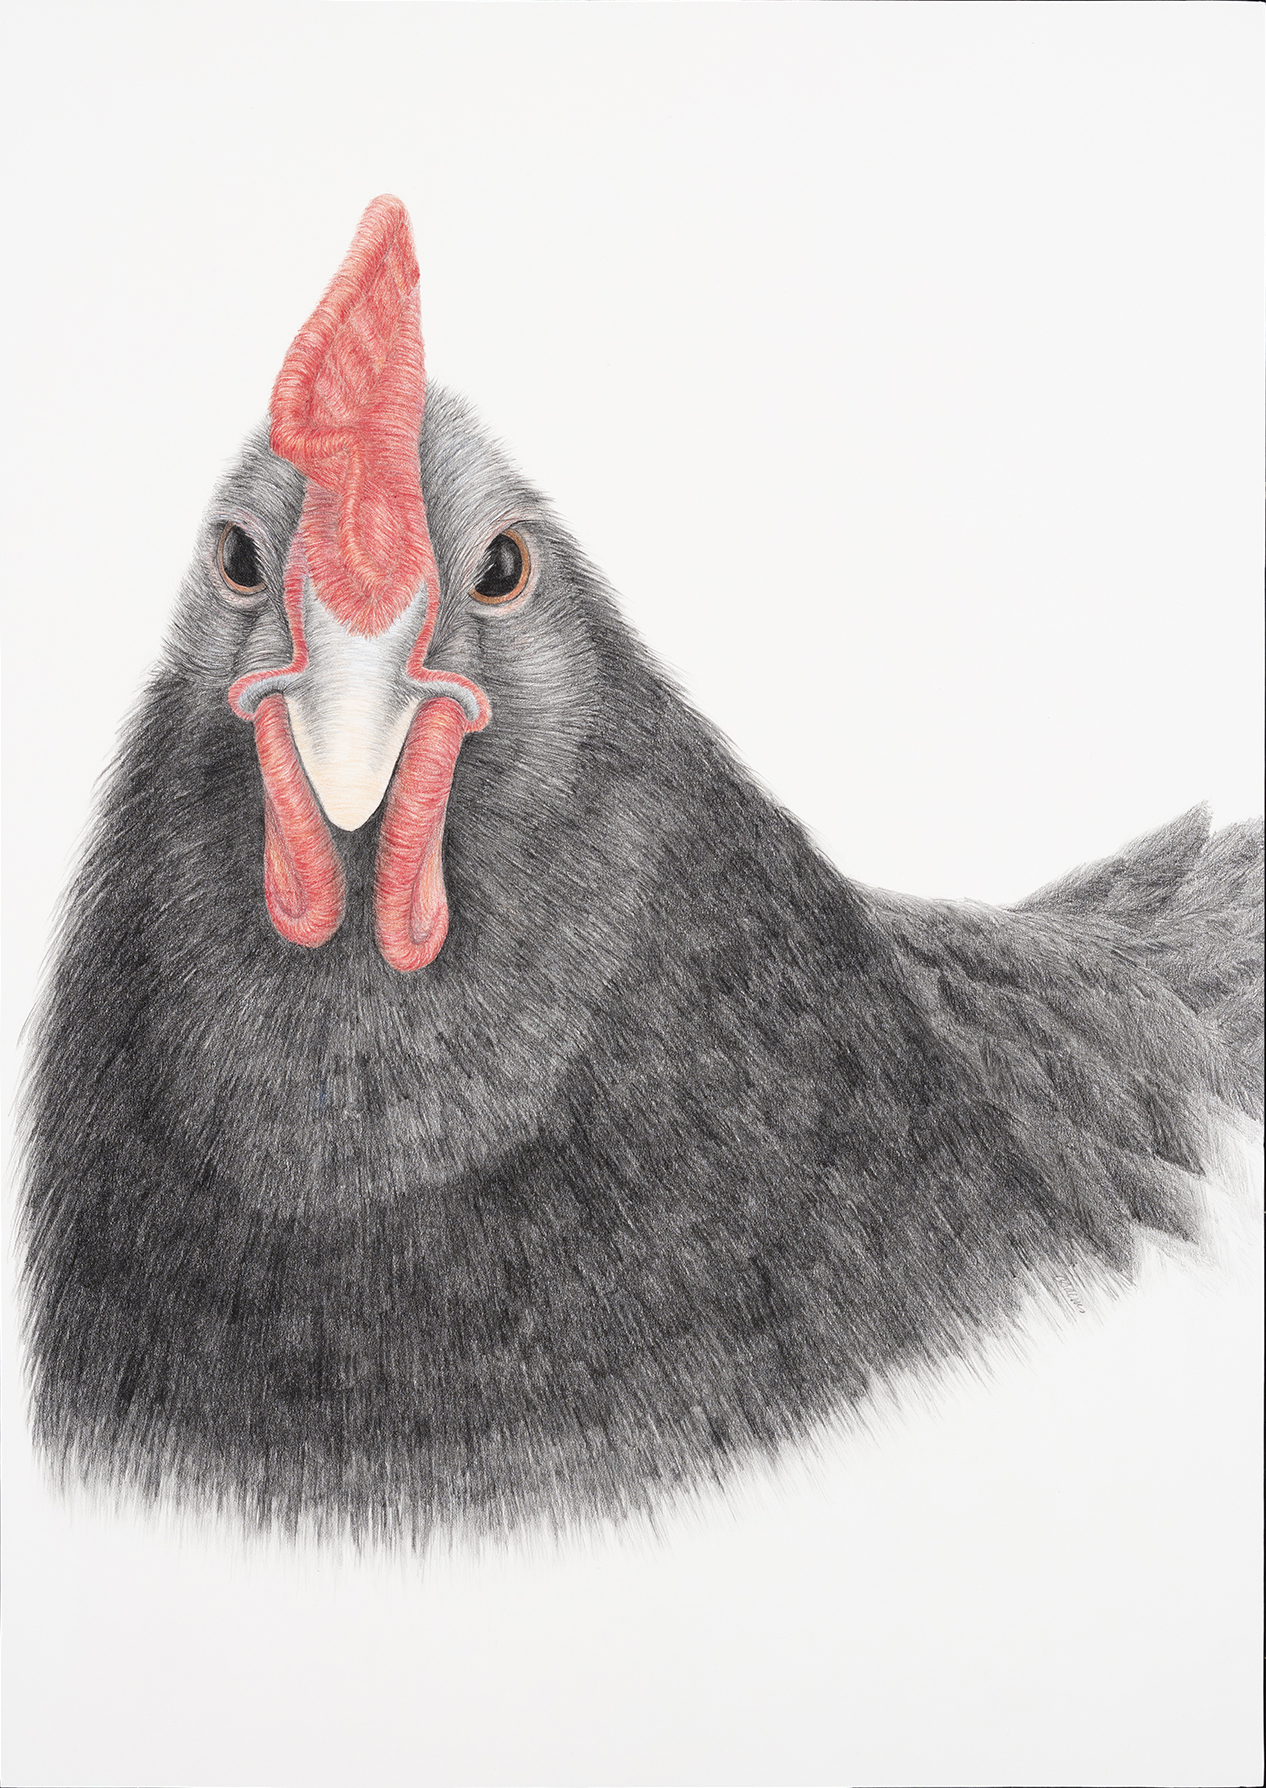   KEEPER OF MY SECRET: CHICKEN   Graphite, colored pencil  25” x 17.75” 